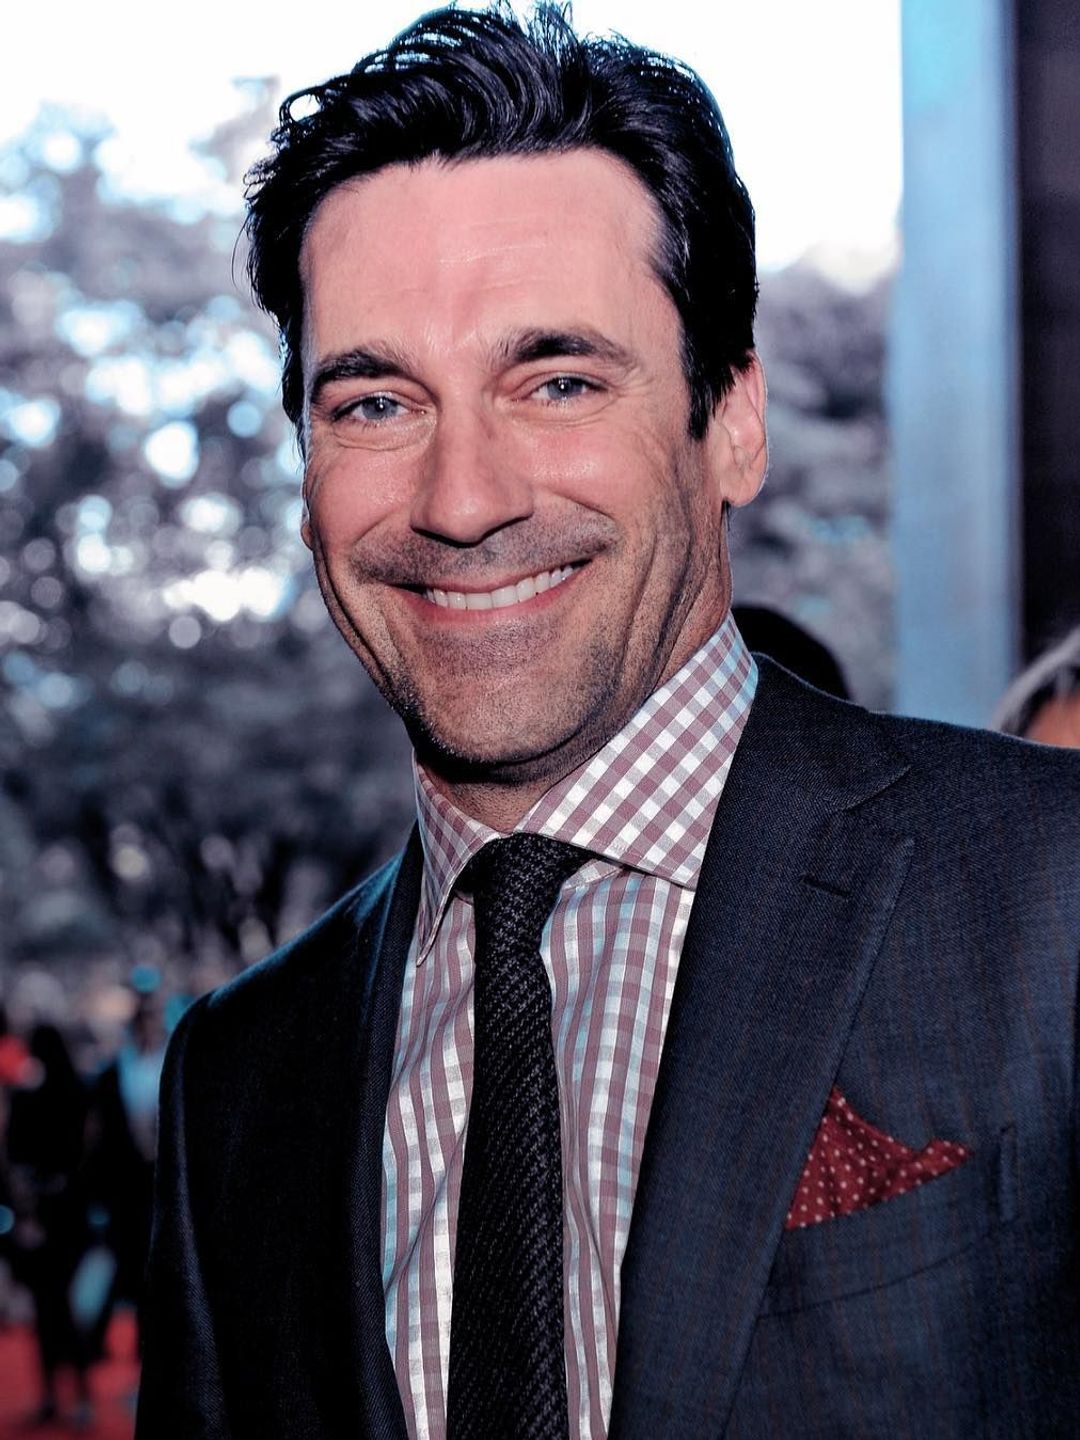 Jon Hamm who is his father